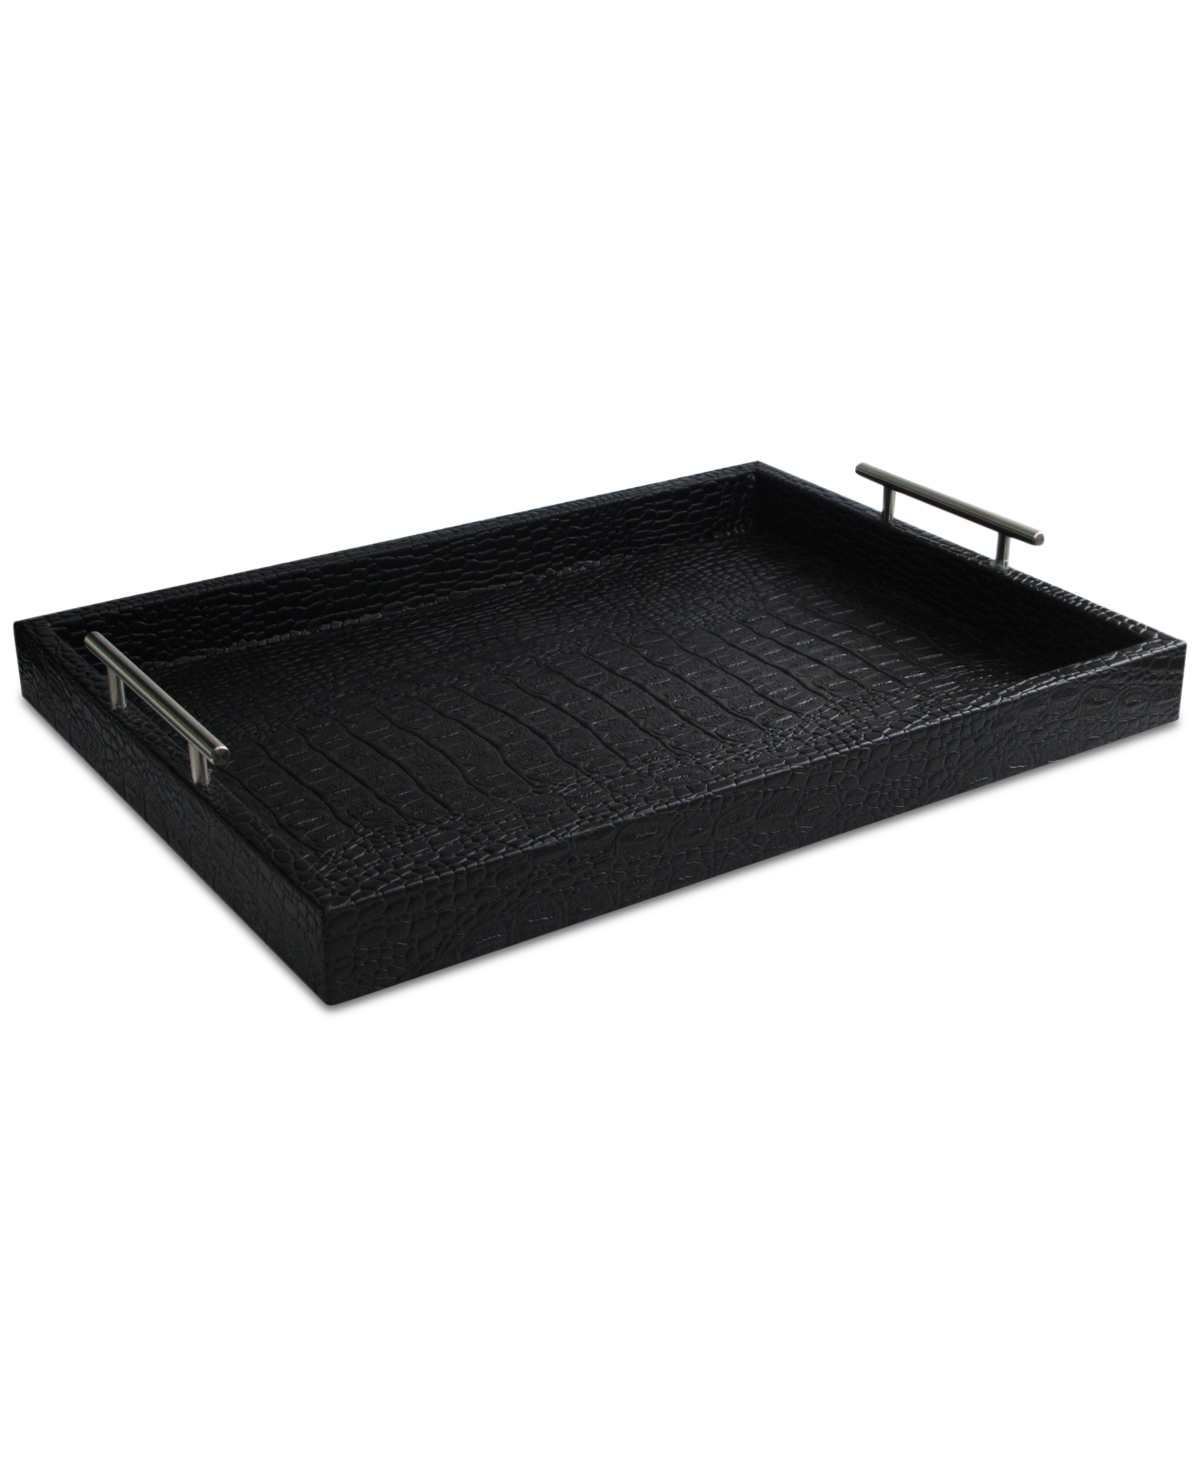 Jay Imports Alligator-embossed Tray With Metal Handles In Black